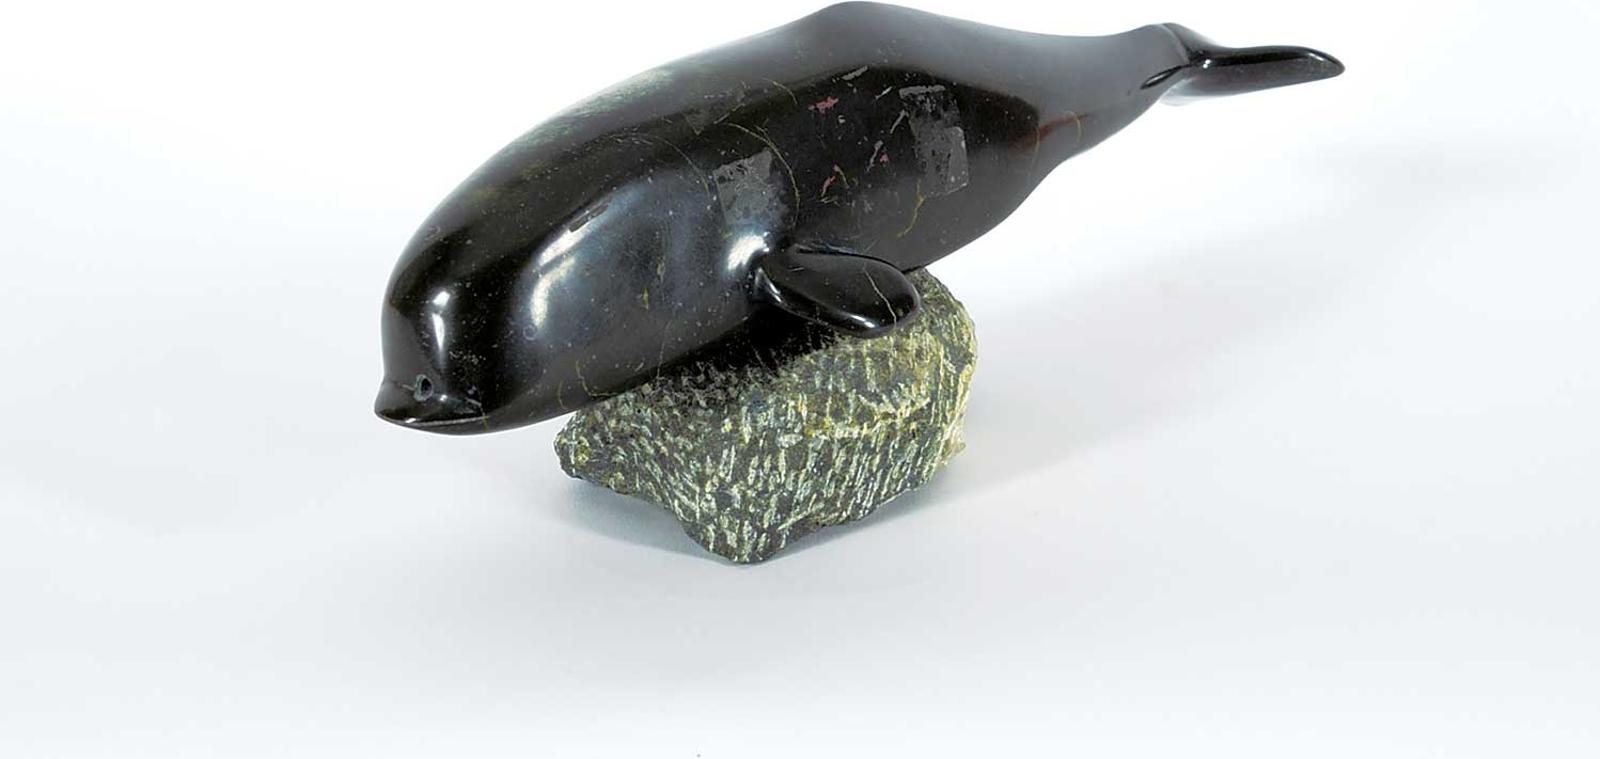 Eegee Inuit - Untitled - Whale